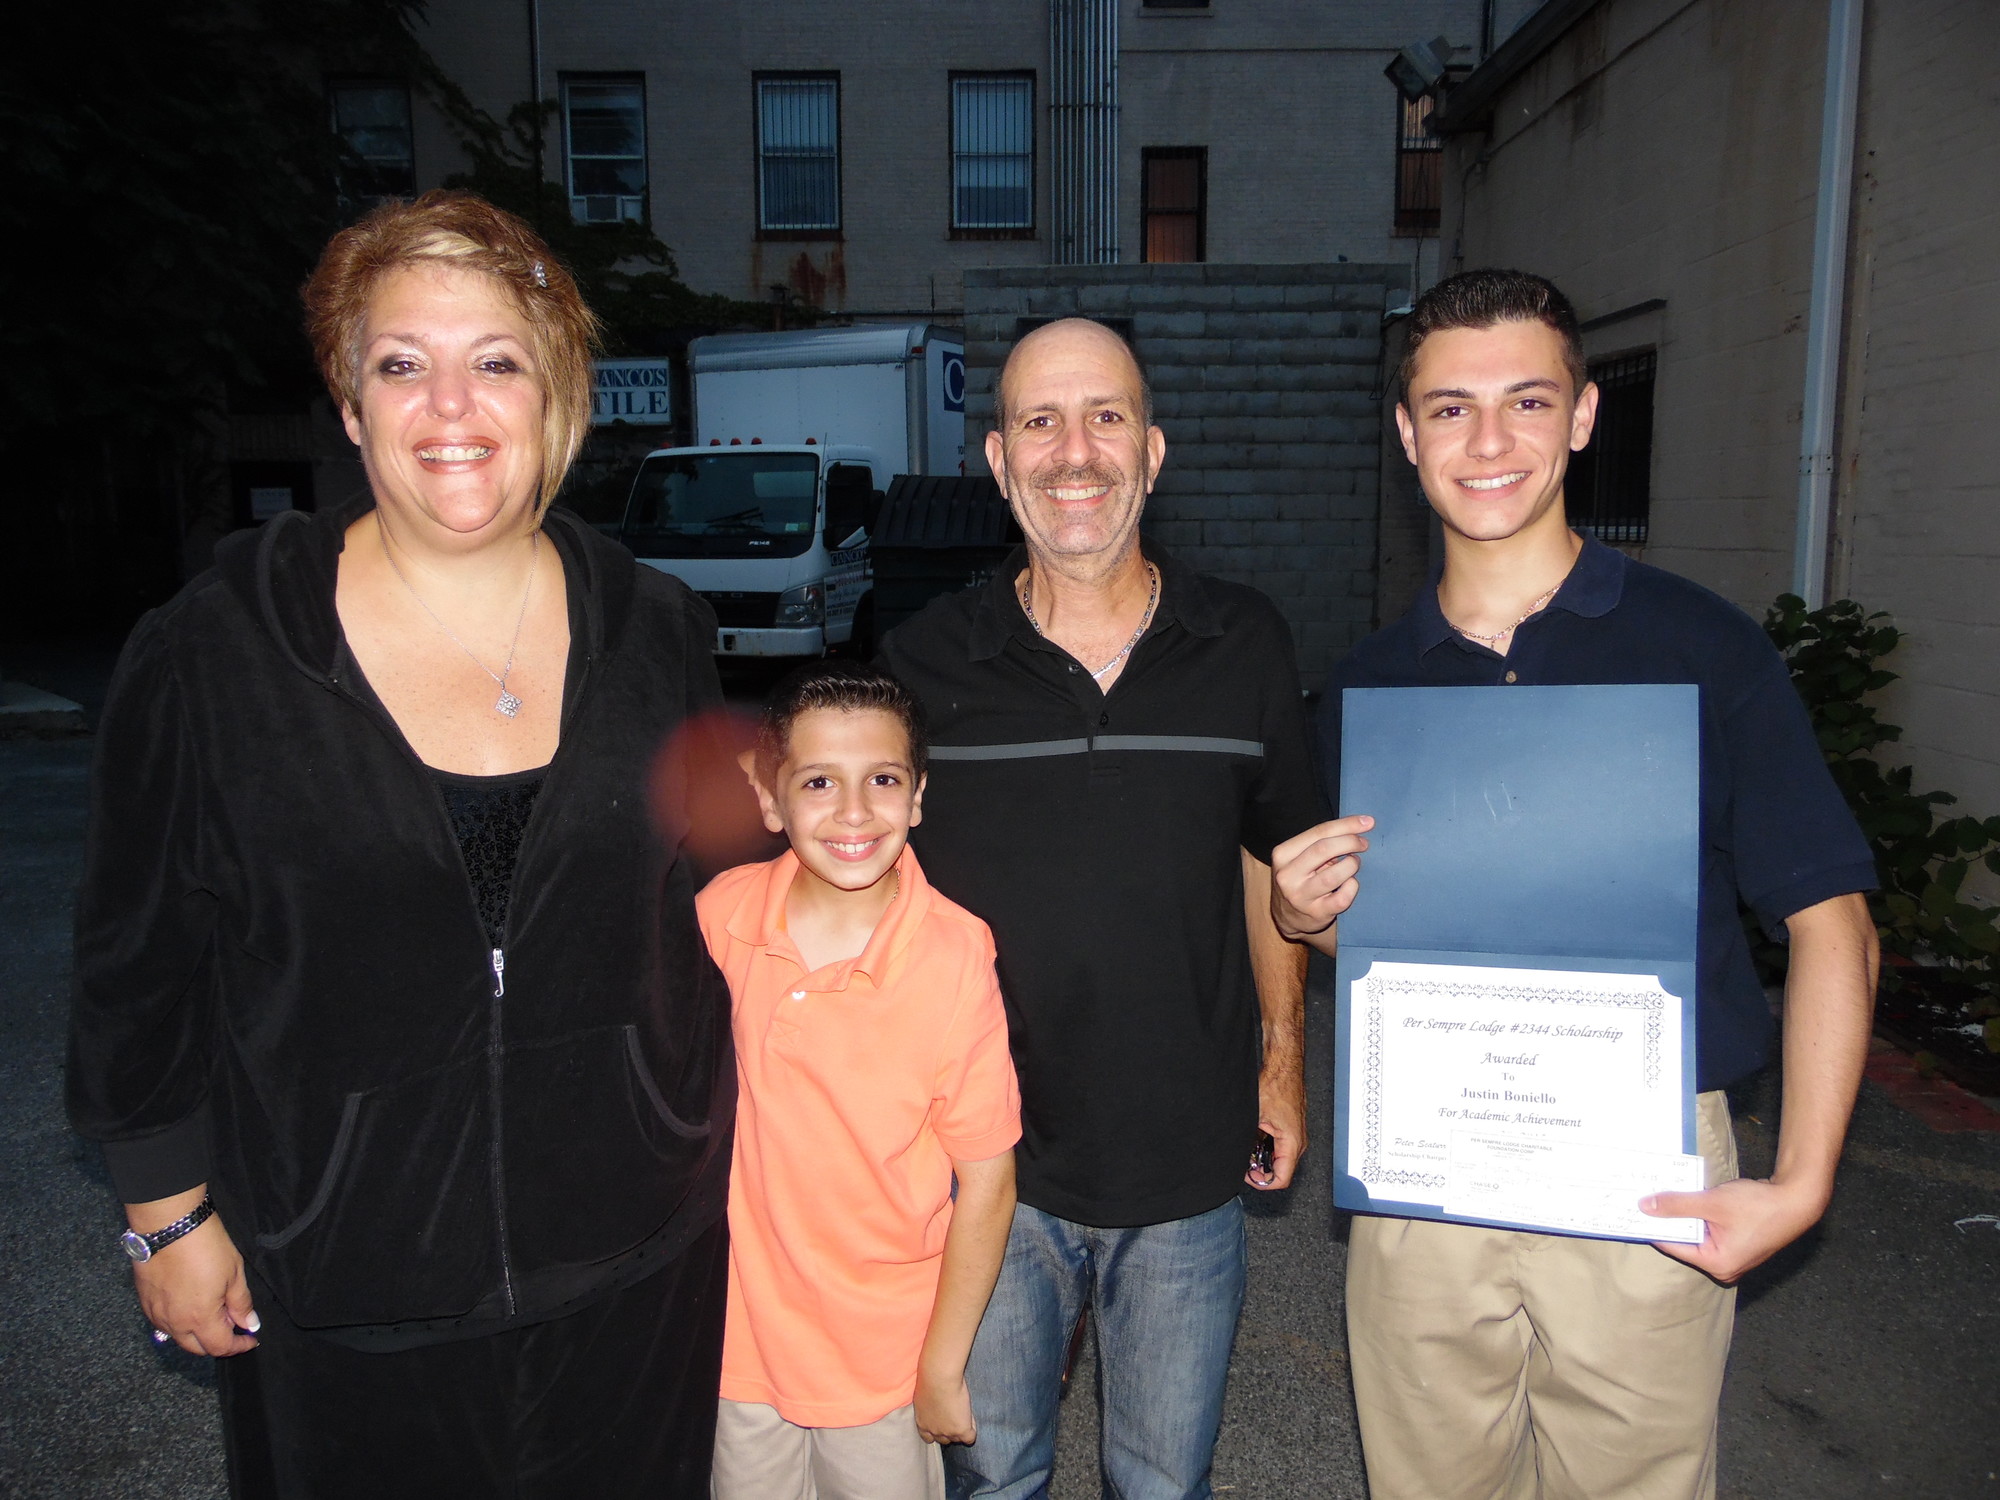 Scholarship winner Justin Boniello, right, was congratulated by his family after the ceremony. His mother, Michelle, is at left, his father, Claude, next to Justin, and his little brother, Joseph.